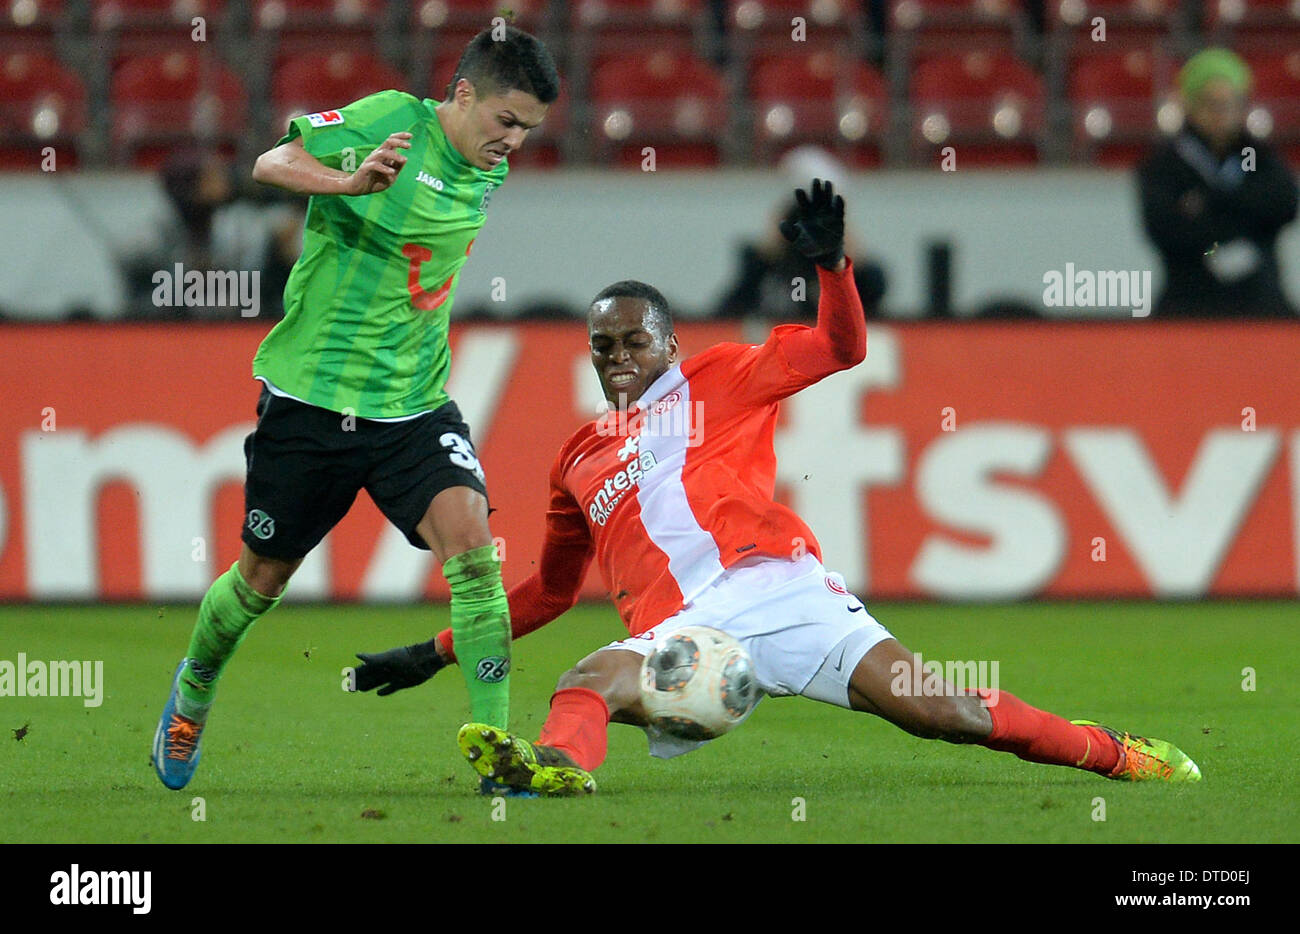 Mainz, Germany. 14th Feb, 2014. Hanover's Leonardo Bittencourt (L) in action against Mainz's Junior Diaz during the German Bundesliga soccer match between 1. FSV Mainz 05 and Hannover 96 at Coface Arena in Mainz, Germany, 14 February 2014. Photo: Torsten Silz/dpa/Alamy Live News Stock Photo